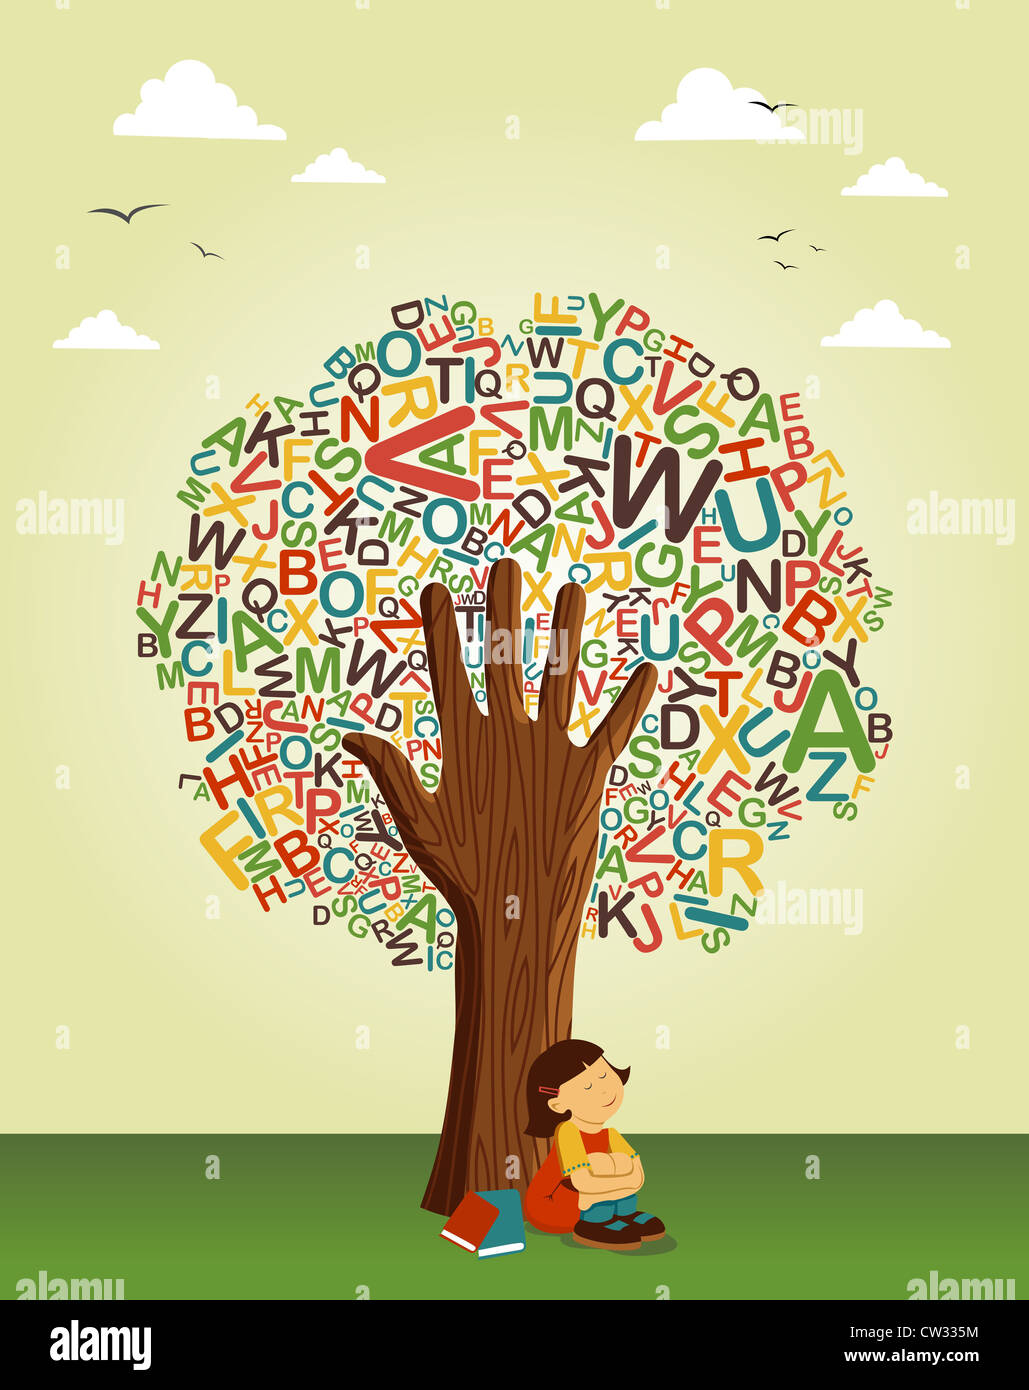 Back to schoo concept tree. Learn to read collaborative education. Vector file layered for easy manipulation and custom coloring Stock Photo